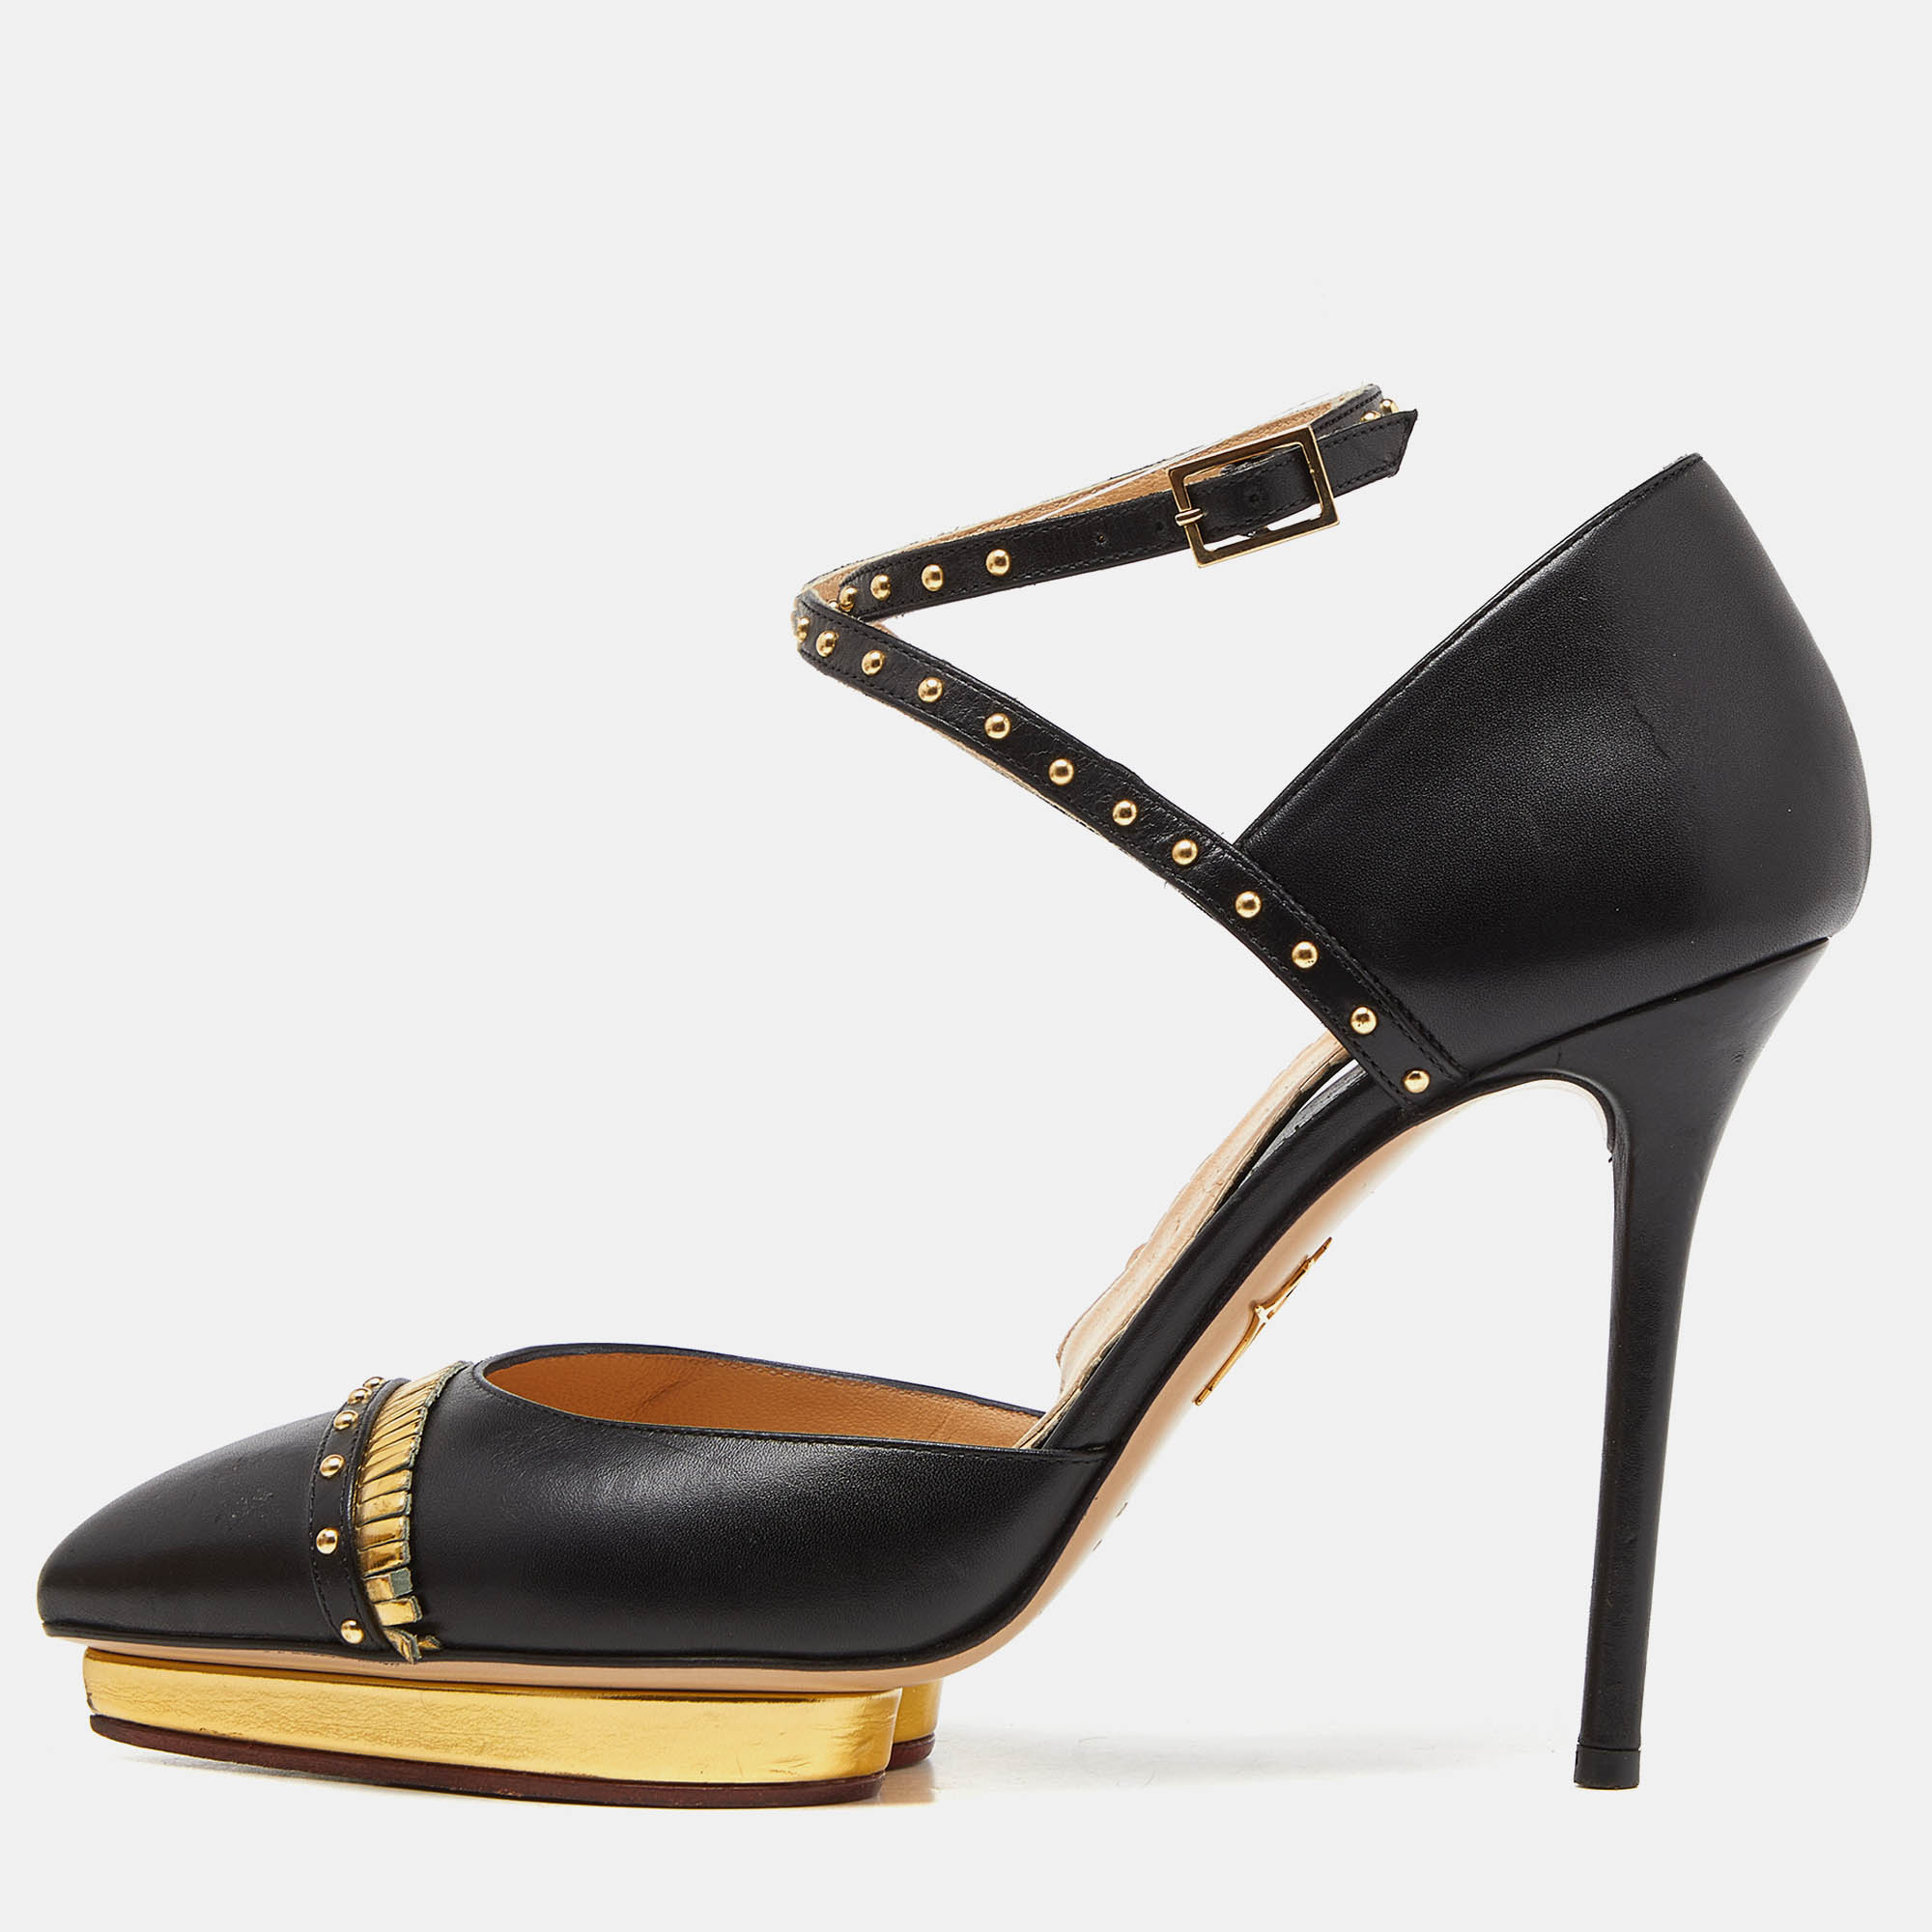 Charlotte olympia black leather studded pointed toe ankle strap pumps size 39